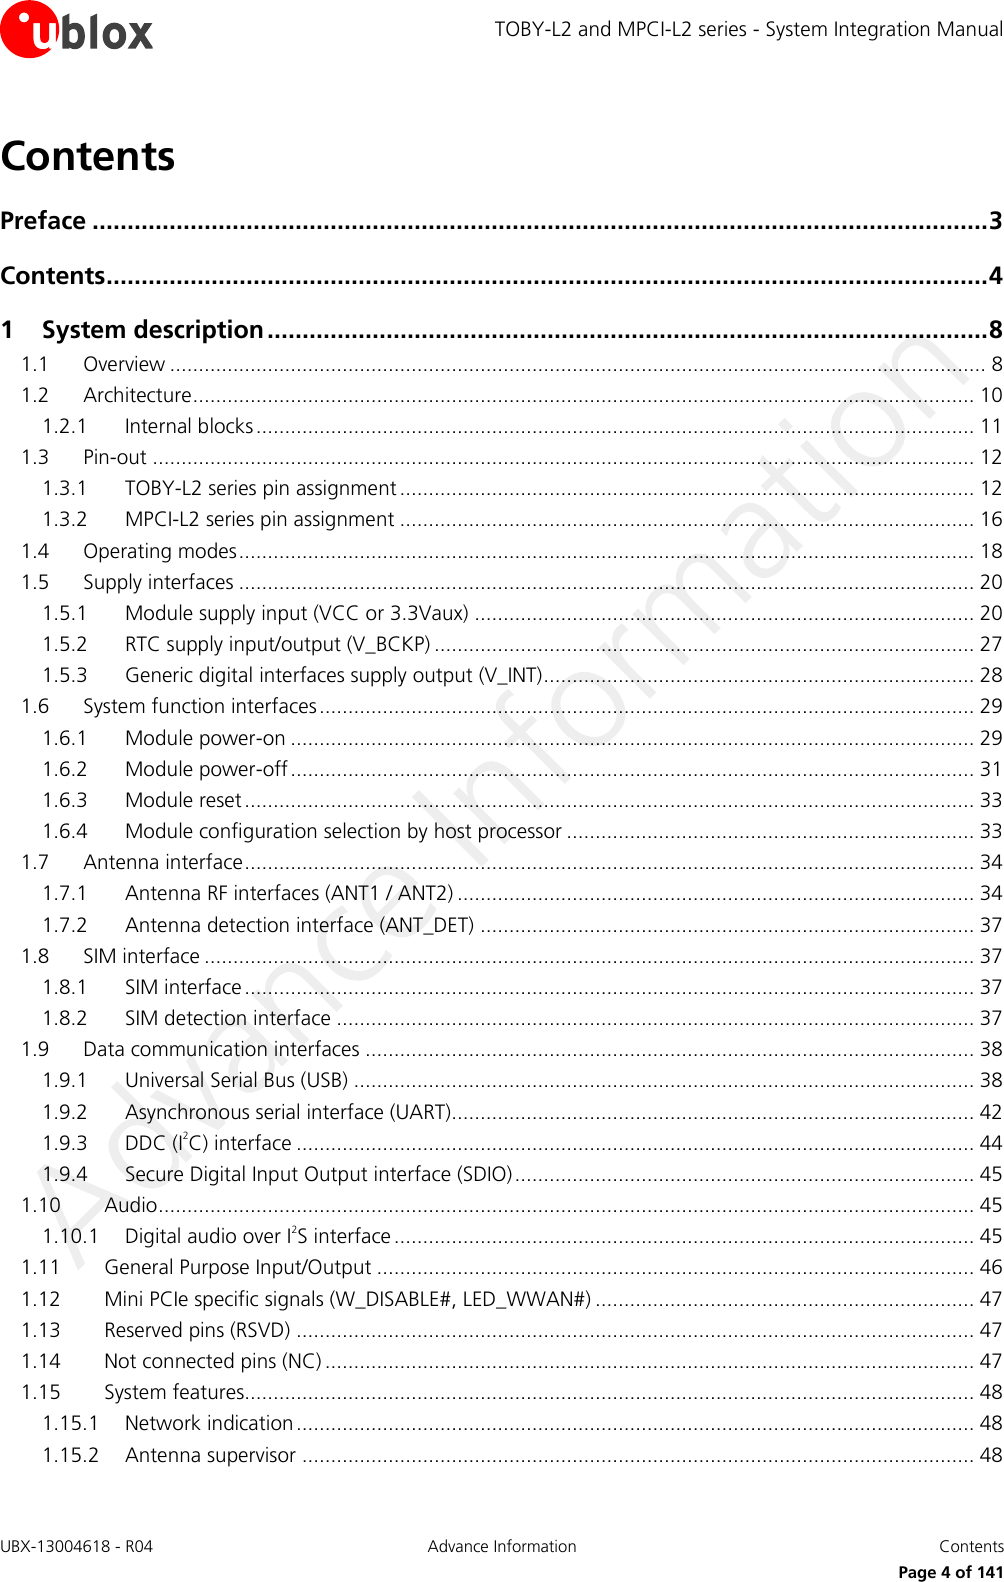 TOBY-L2 and MPCI-L2 series - System Integration Manual UBX-13004618 - R04  Advance Information  Contents     Page 4 of 141 Contents Preface ................................................................................................................................ 3 Contents .............................................................................................................................. 4 1 System description ....................................................................................................... 8 1.1 Overview .............................................................................................................................................. 8 1.2 Architecture ........................................................................................................................................ 10 1.2.1 Internal blocks ............................................................................................................................. 11 1.3 Pin-out ............................................................................................................................................... 12 1.3.1 TOBY-L2 series pin assignment .................................................................................................... 12 1.3.2 MPCI-L2 series pin assignment .................................................................................................... 16 1.4 Operating modes ................................................................................................................................ 18 1.5 Supply interfaces ................................................................................................................................ 20 1.5.1 Module supply input (VCC or 3.3Vaux) ....................................................................................... 20 1.5.2 RTC supply input/output (V_BCKP) .............................................................................................. 27 1.5.3 Generic digital interfaces supply output (V_INT) ........................................................................... 28 1.6 System function interfaces .................................................................................................................. 29 1.6.1 Module power-on ....................................................................................................................... 29 1.6.2 Module power-off ....................................................................................................................... 31 1.6.3 Module reset ............................................................................................................................... 33 1.6.4 Module configuration selection by host processor ....................................................................... 33 1.7 Antenna interface ............................................................................................................................... 34 1.7.1 Antenna RF interfaces (ANT1 / ANT2) .......................................................................................... 34 1.7.2 Antenna detection interface (ANT_DET) ...................................................................................... 37 1.8 SIM interface ...................................................................................................................................... 37 1.8.1 SIM interface ............................................................................................................................... 37 1.8.2 SIM detection interface ............................................................................................................... 37 1.9 Data communication interfaces .......................................................................................................... 38 1.9.1 Universal Serial Bus (USB) ............................................................................................................ 38 1.9.2 Asynchronous serial interface (UART)........................................................................................... 42 1.9.3 DDC (I2C) interface ...................................................................................................................... 44 1.9.4 Secure Digital Input Output interface (SDIO) ................................................................................ 45 1.10 Audio .............................................................................................................................................. 45 1.10.1 Digital audio over I2S interface ..................................................................................................... 45 1.11 General Purpose Input/Output ........................................................................................................ 46 1.12 Mini PCIe specific signals (W_DISABLE#, LED_WWAN#) .................................................................. 47 1.13 Reserved pins (RSVD) ...................................................................................................................... 47 1.14 Not connected pins (NC) ................................................................................................................. 47 1.15 System features............................................................................................................................... 48 1.15.1 Network indication ...................................................................................................................... 48 1.15.2 Antenna supervisor ..................................................................................................................... 48 